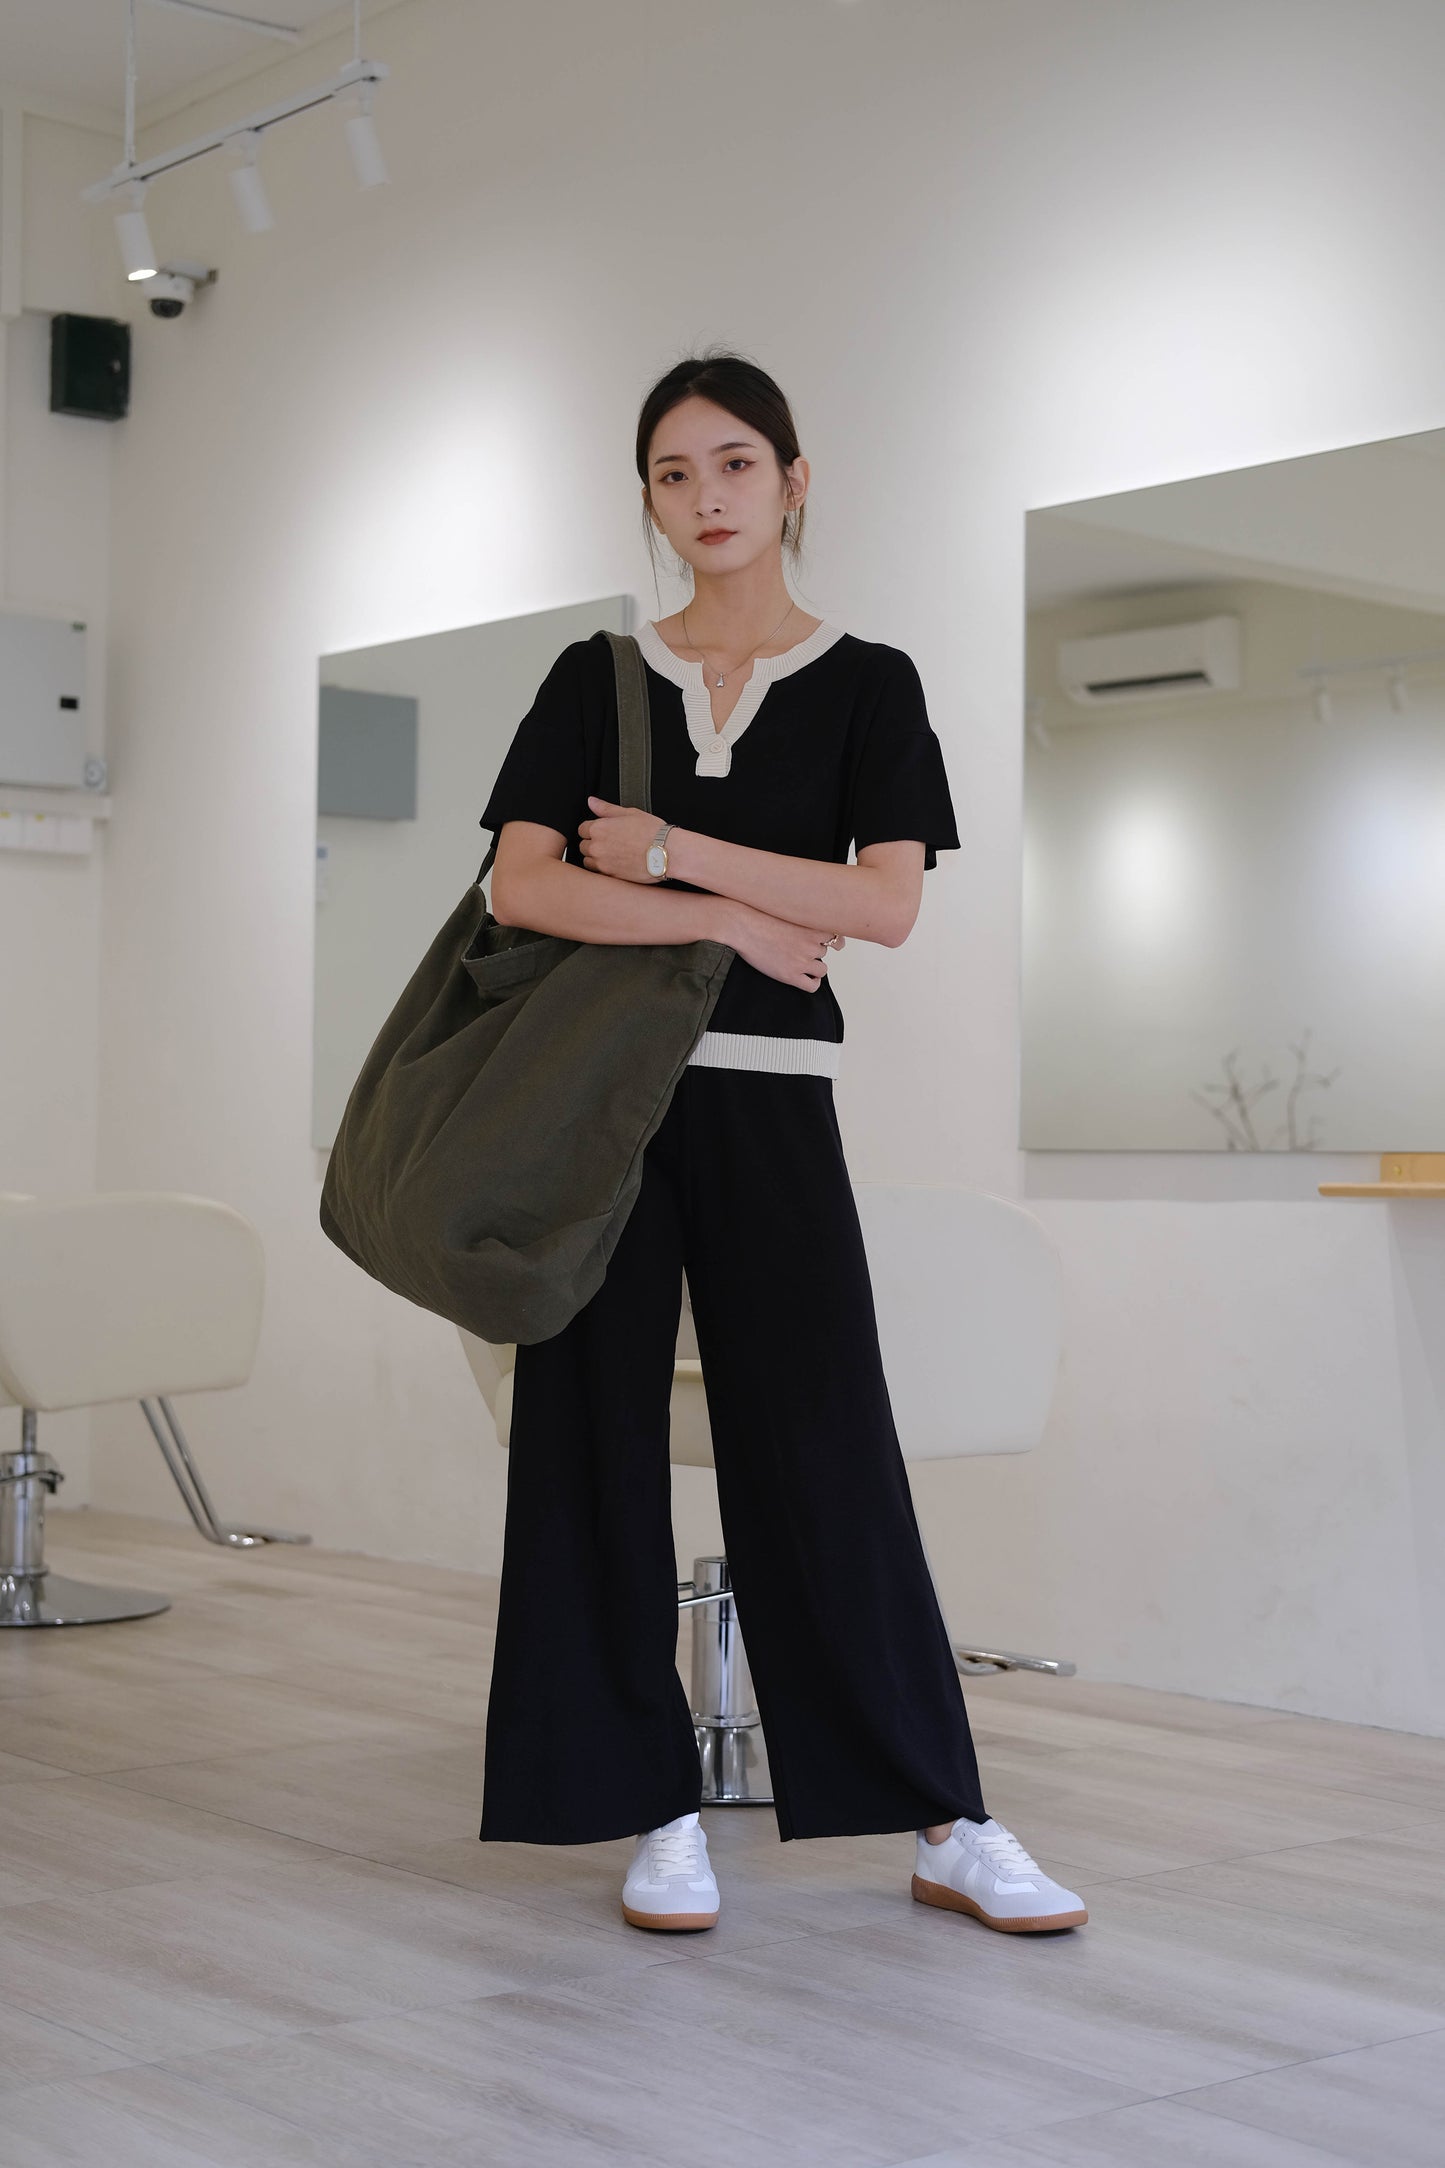 V short-sleeved sweater + high-waist wide-leg pants suit in classic black